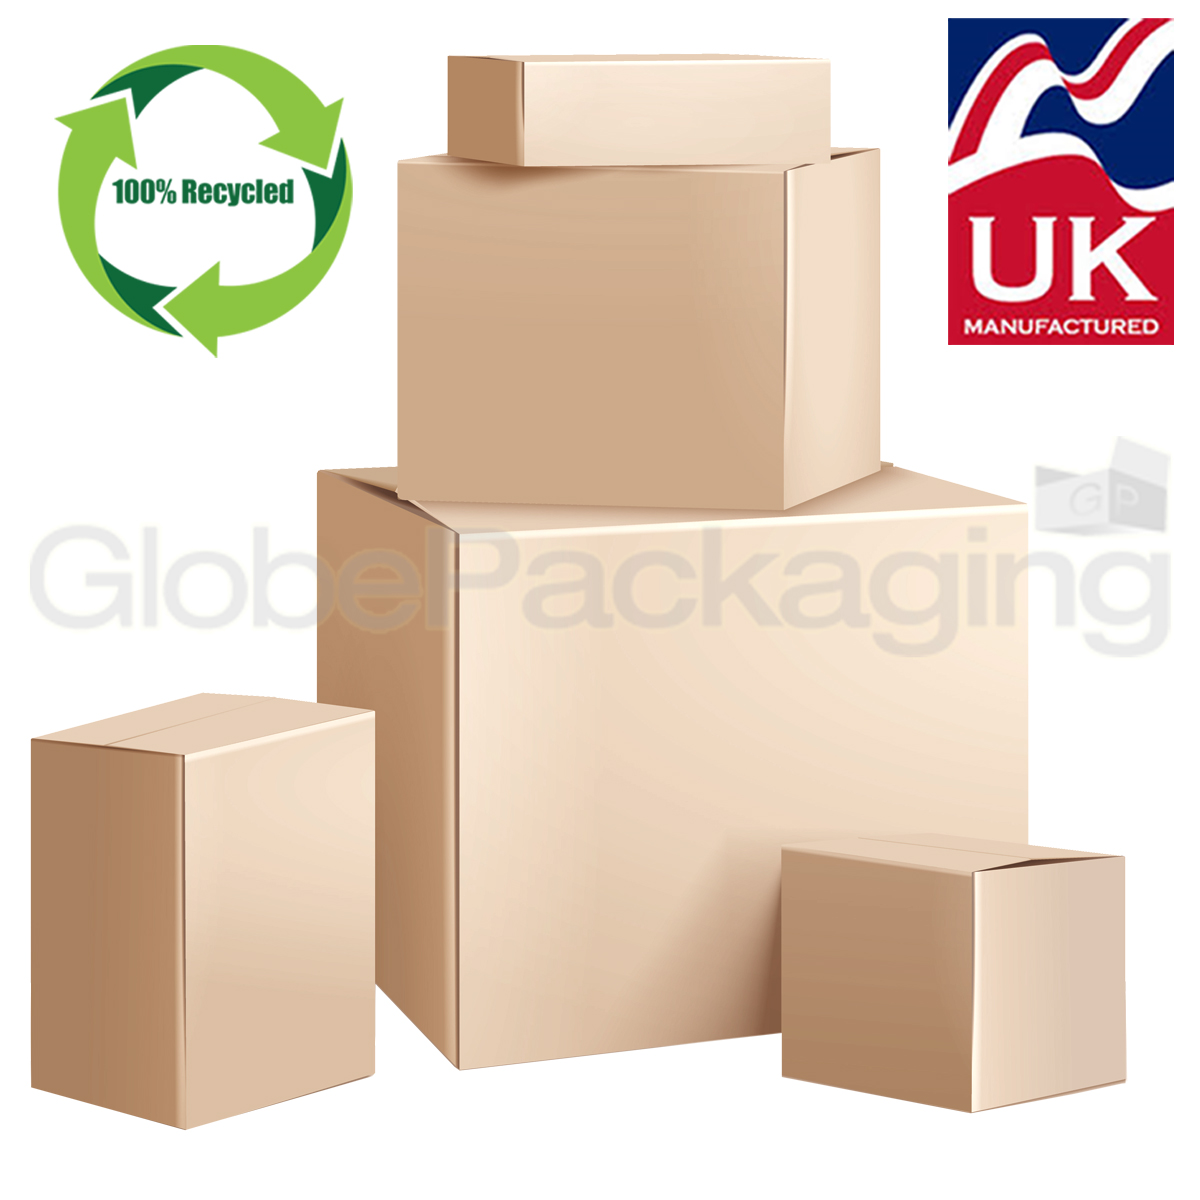 SINGLE WALL CARDBOARD BOXES - 100% RECYCLED & RECYCLABLE POSTAL MAILING BOXES